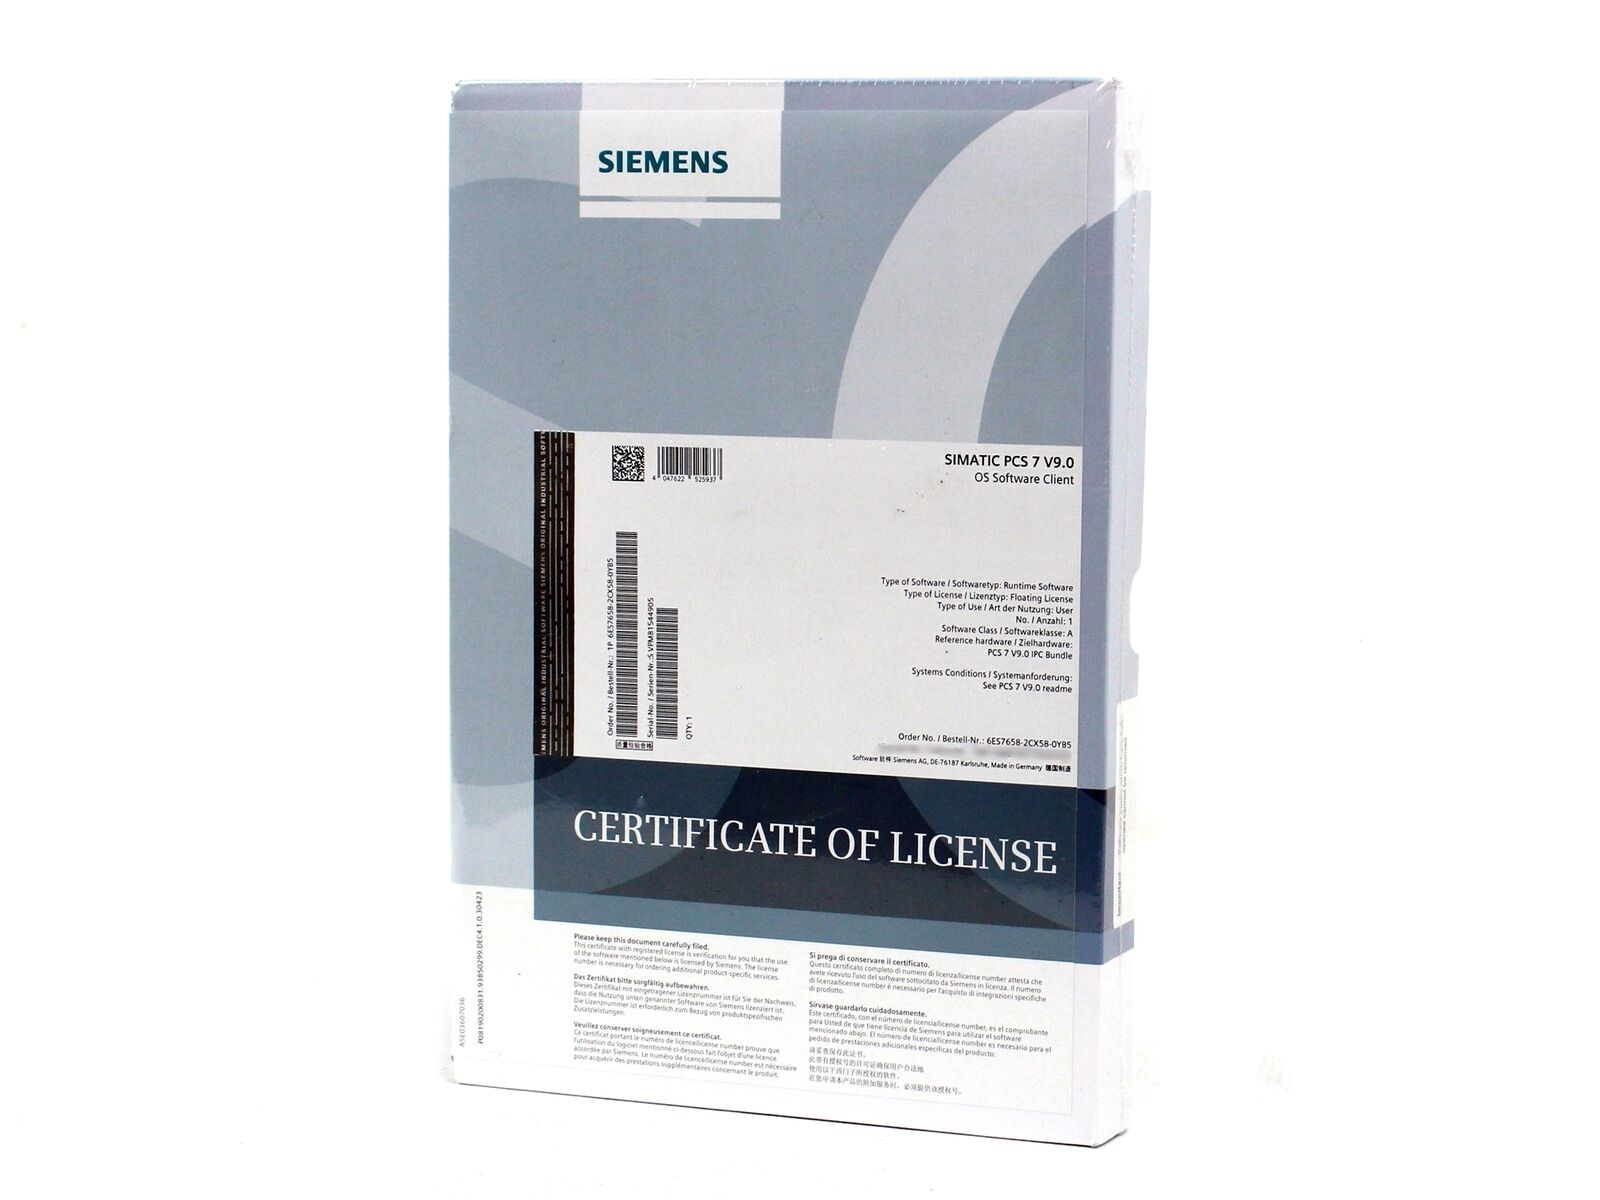 NEW Siemens Simatic PCS 7 V9.0 OS Runtime Software Client Floating License